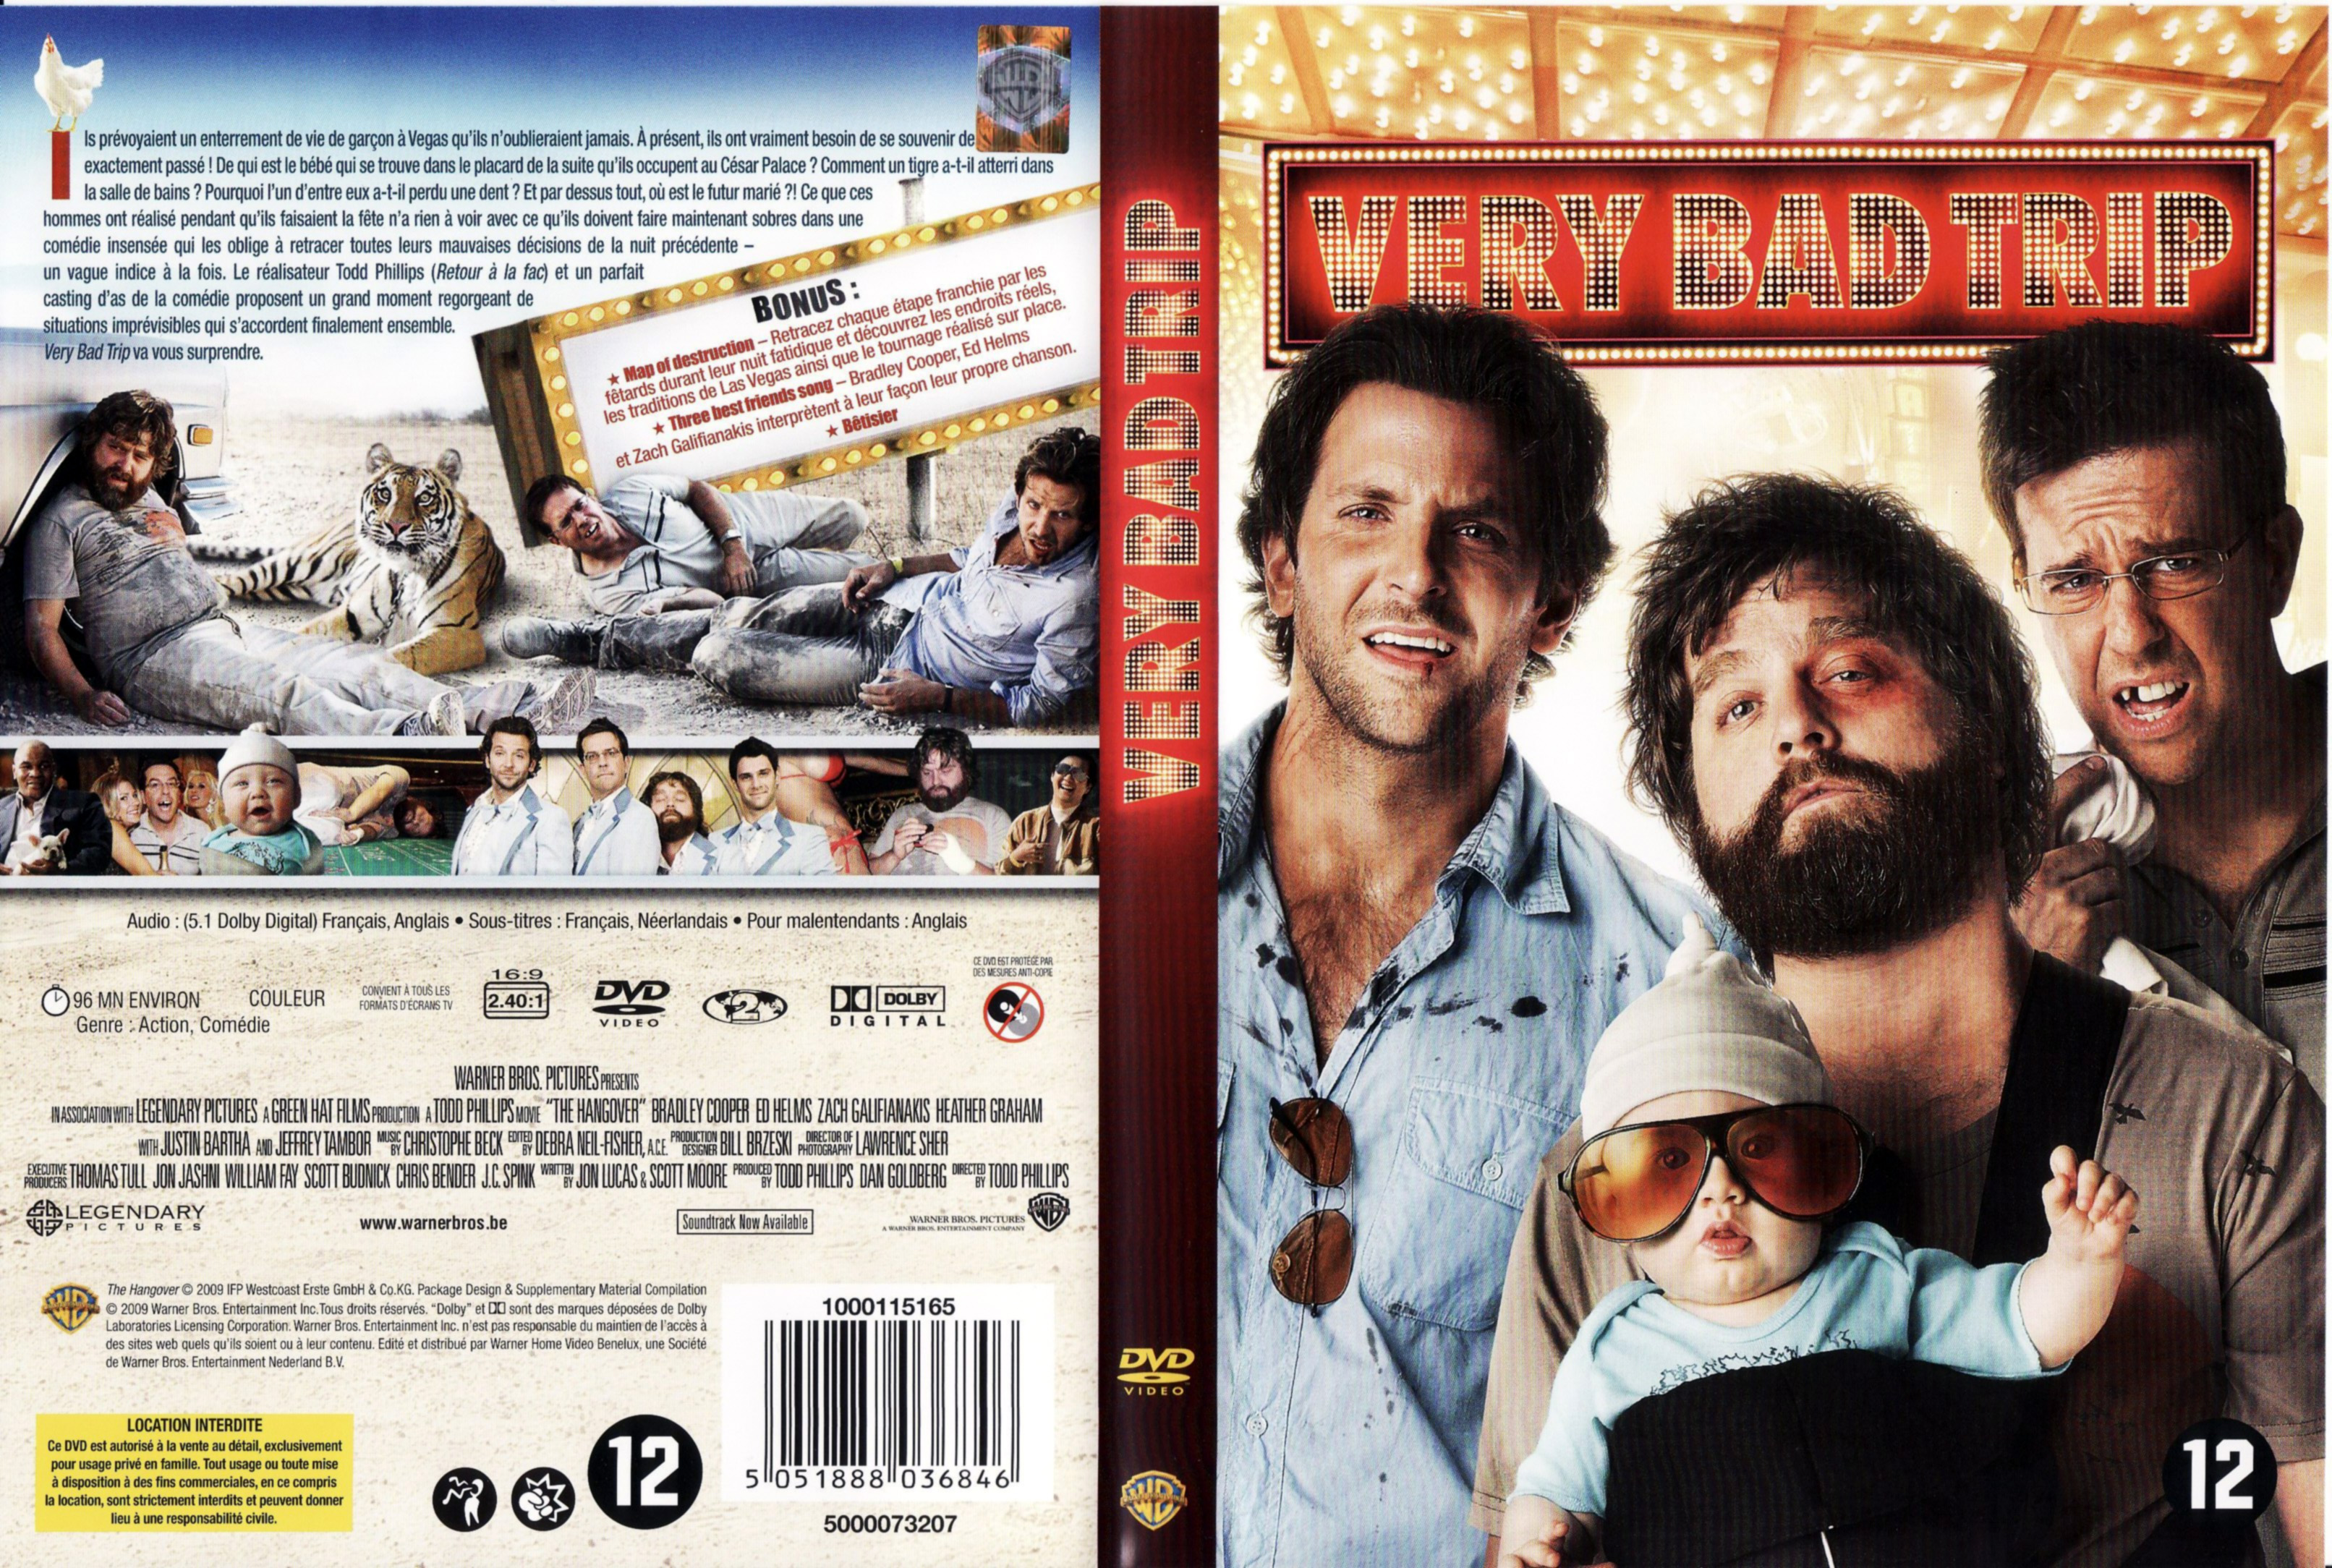 Jaquette DVD Very Bad Trip v2